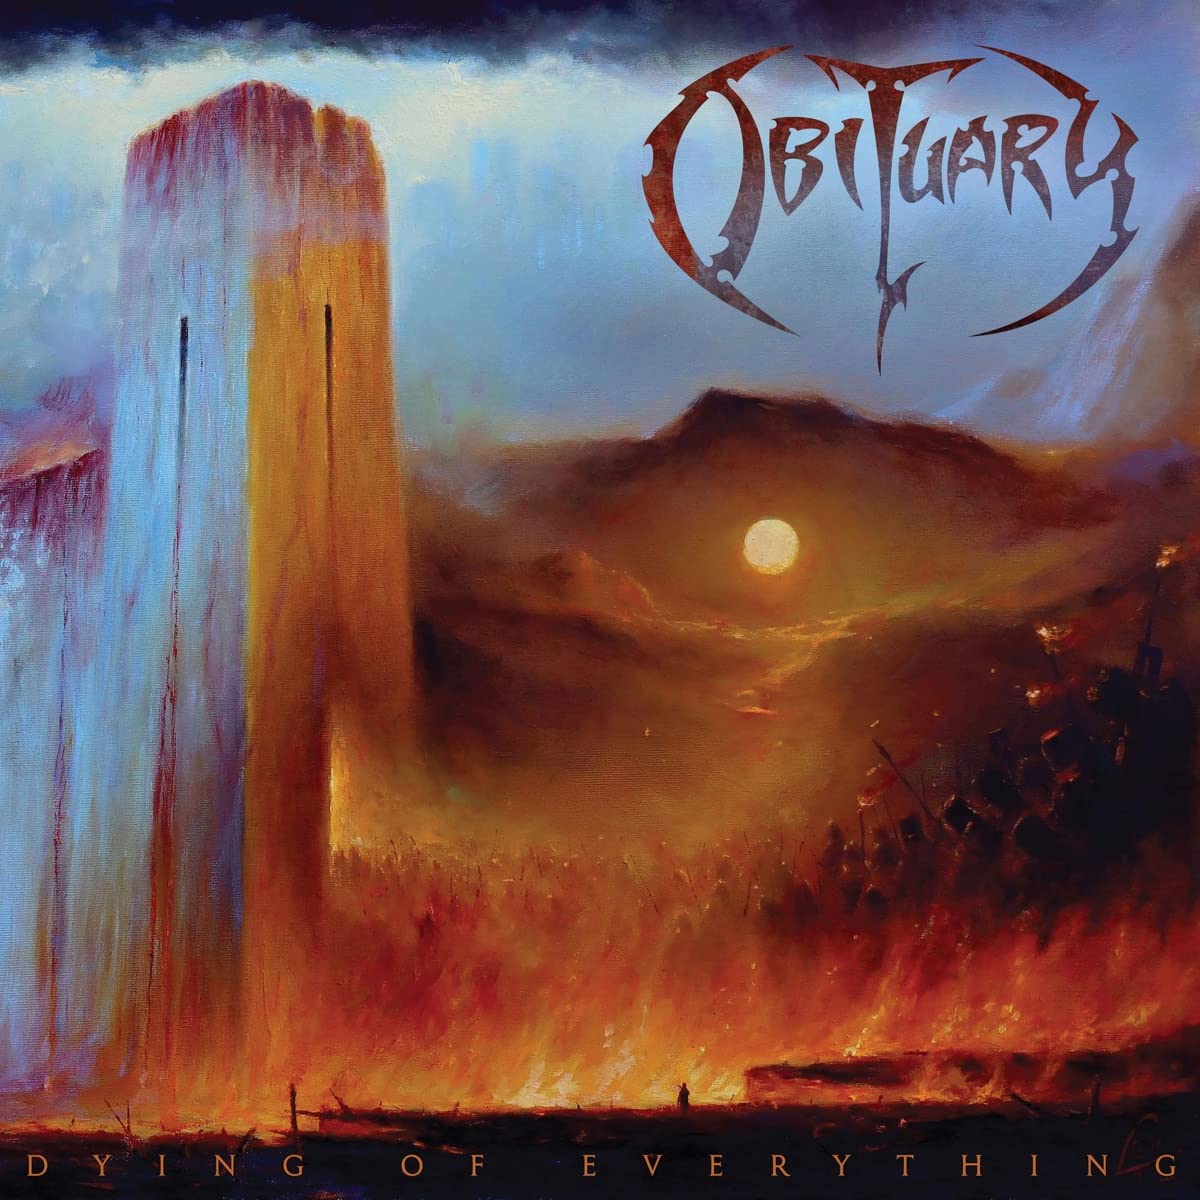 OBITUARY "Dying Of Everything" LP